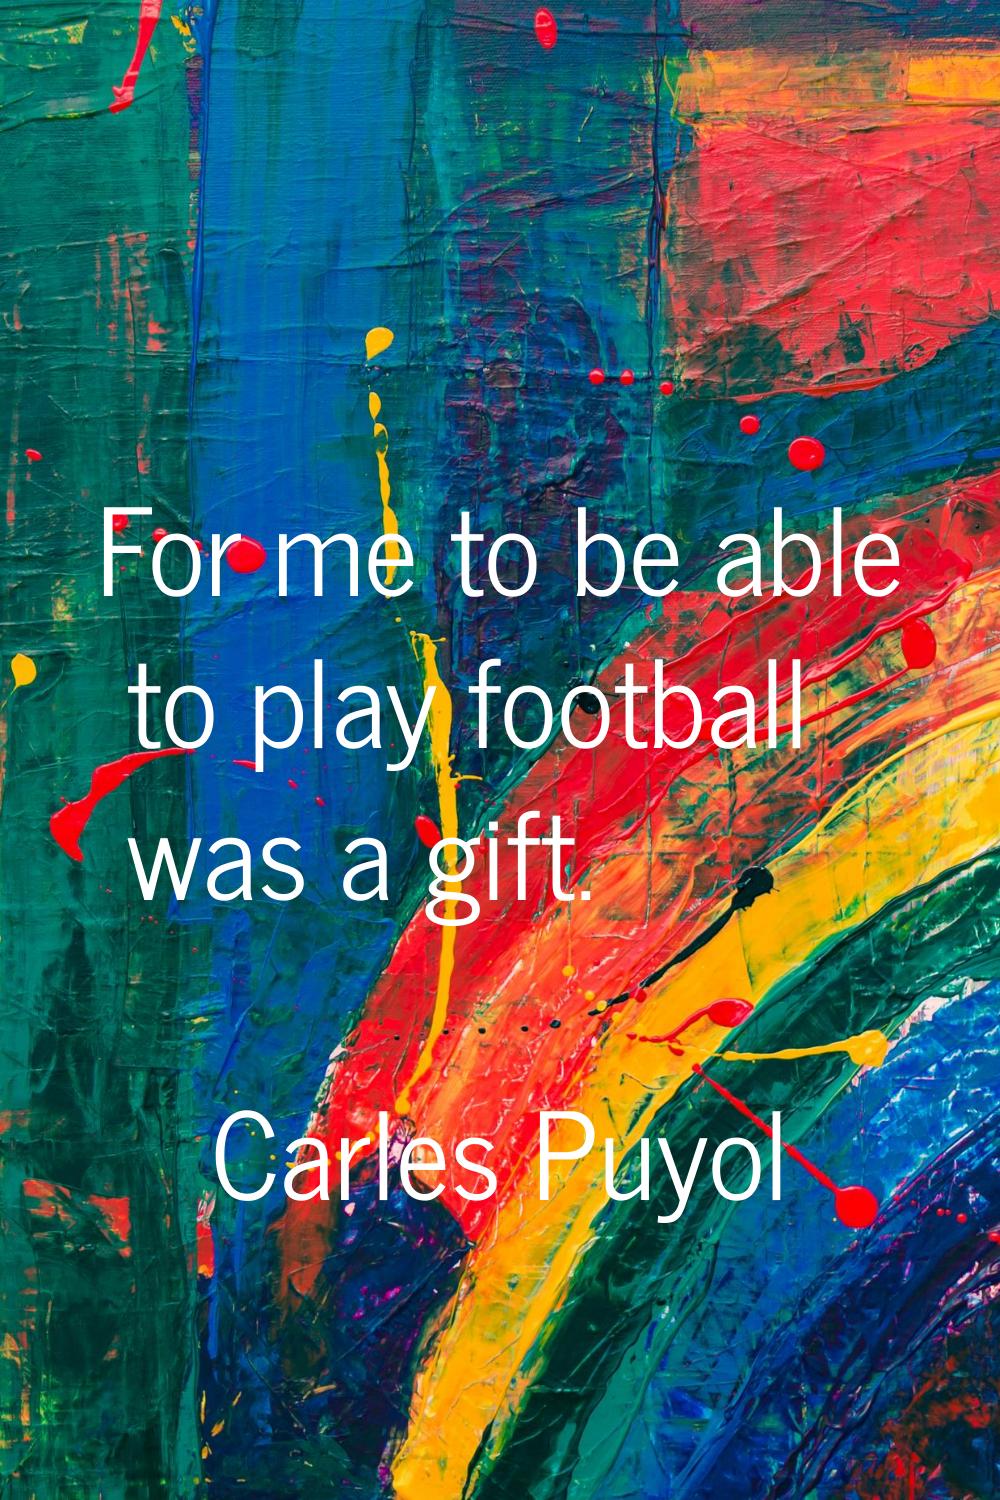 For me to be able to play football was a gift.